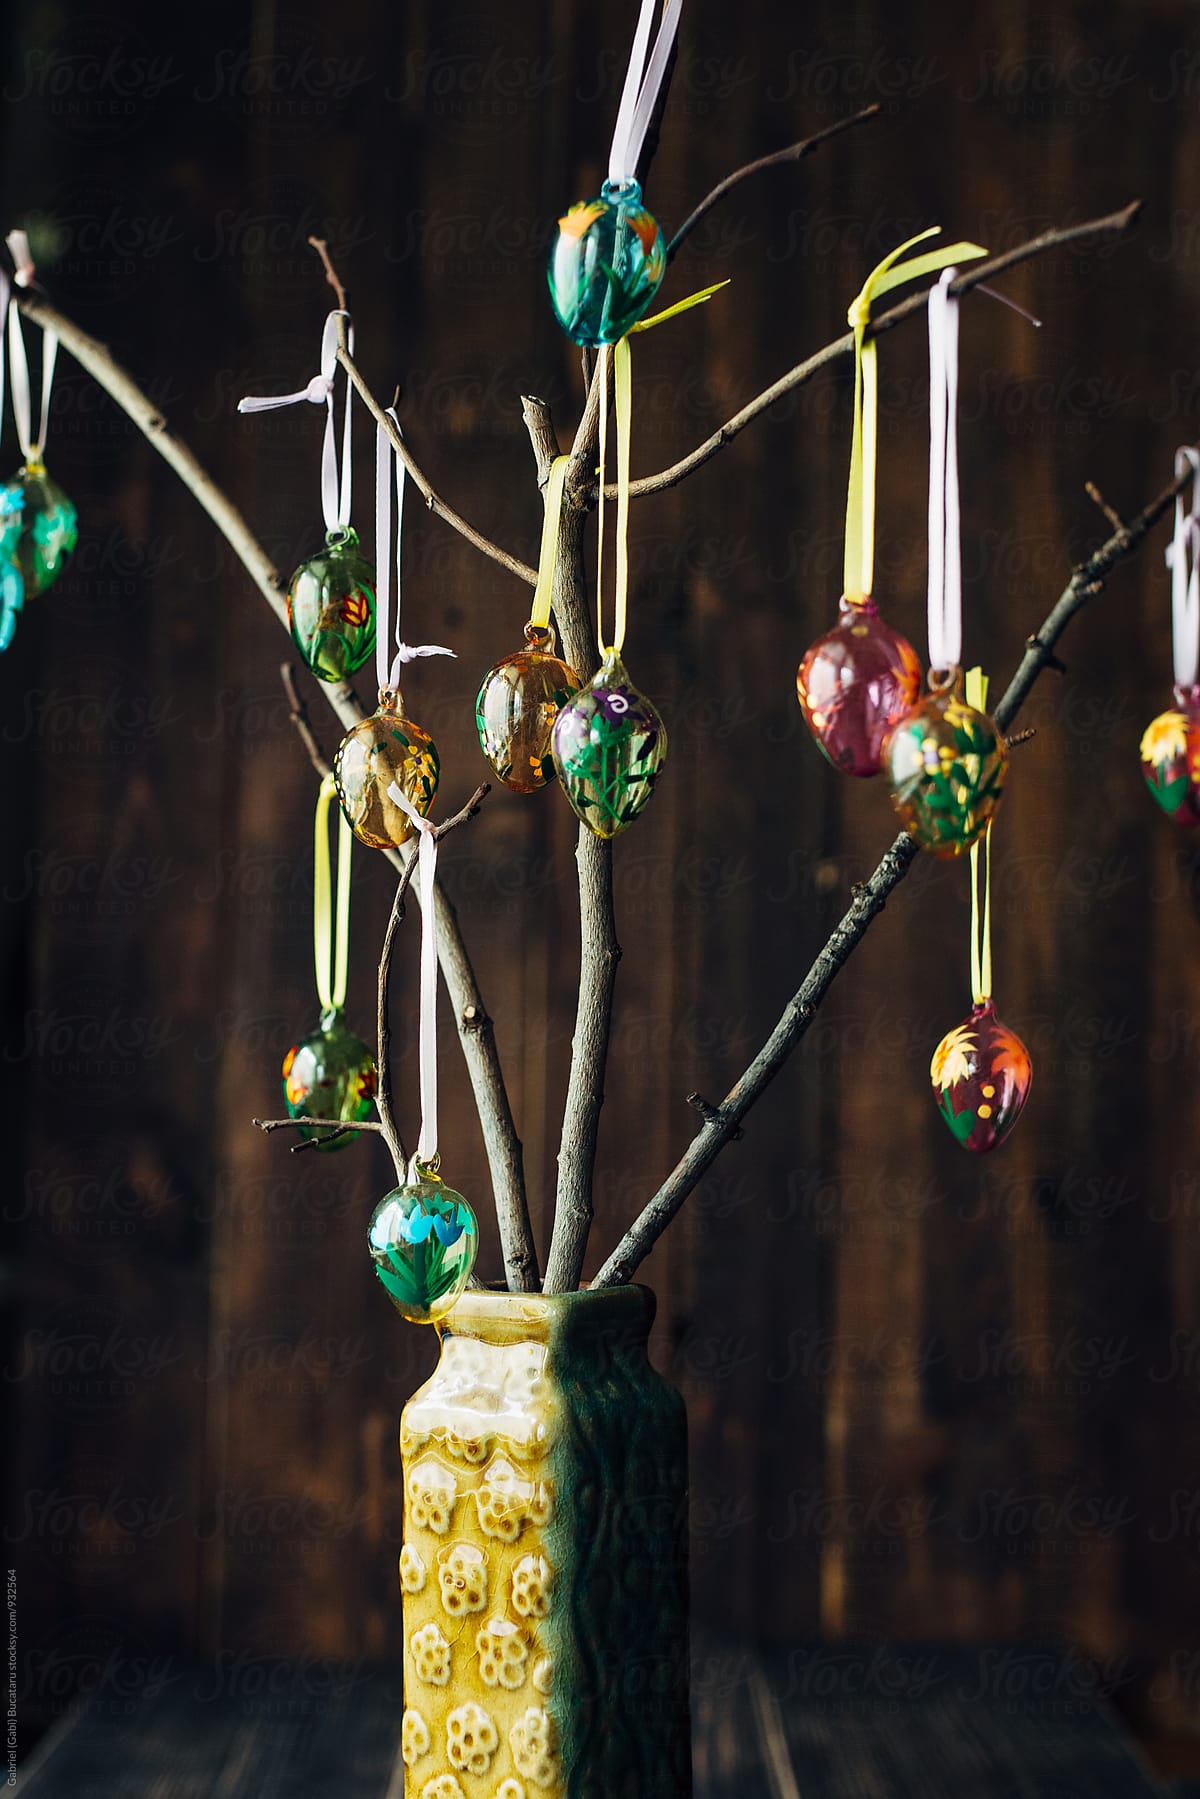 Ornamental Easter eggs on branches